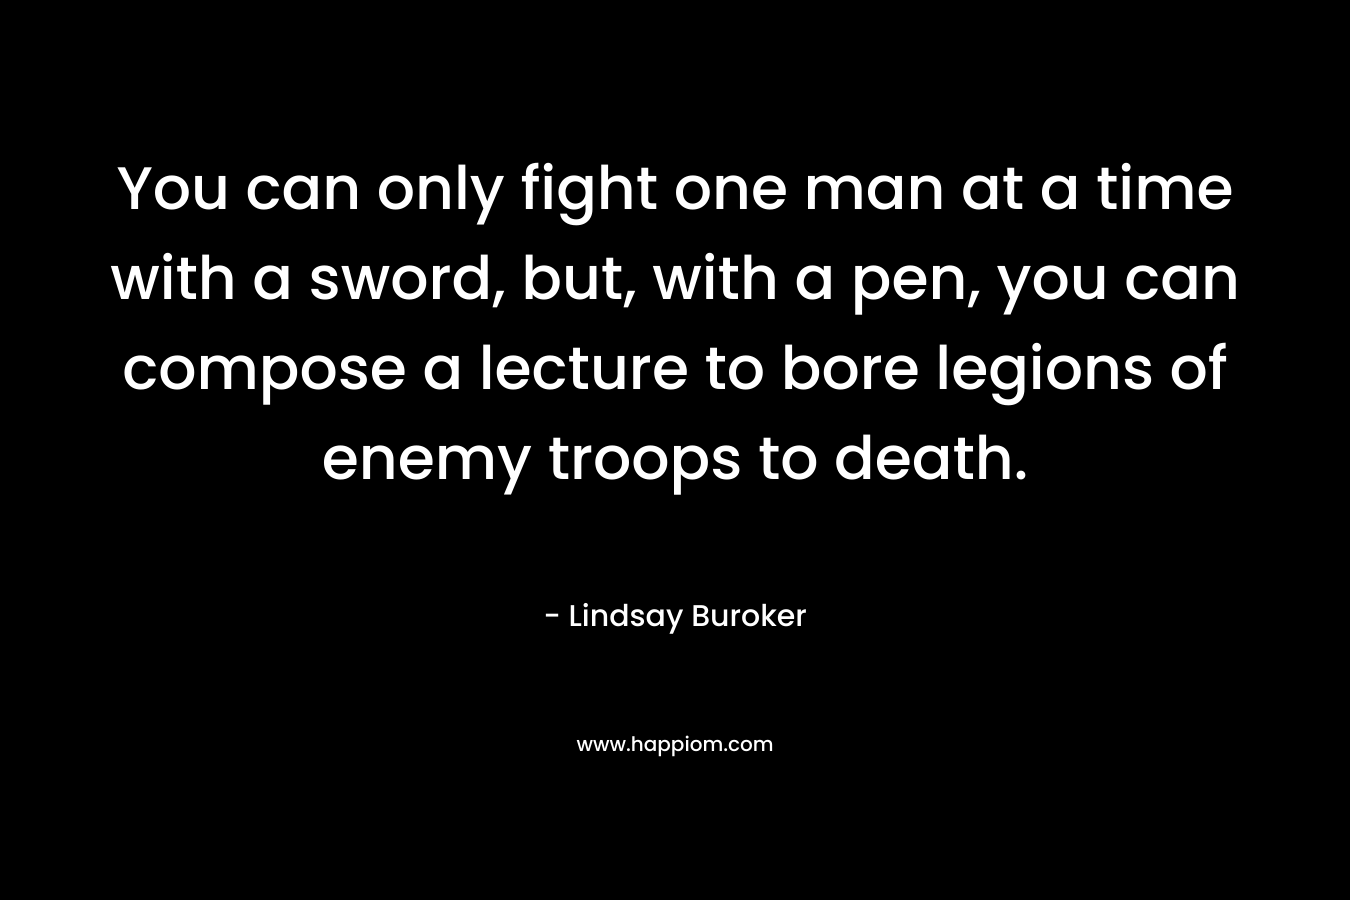 You can only fight one man at a time with a sword, but, with a pen, you can compose a lecture to bore legions of enemy troops to death. – Lindsay Buroker